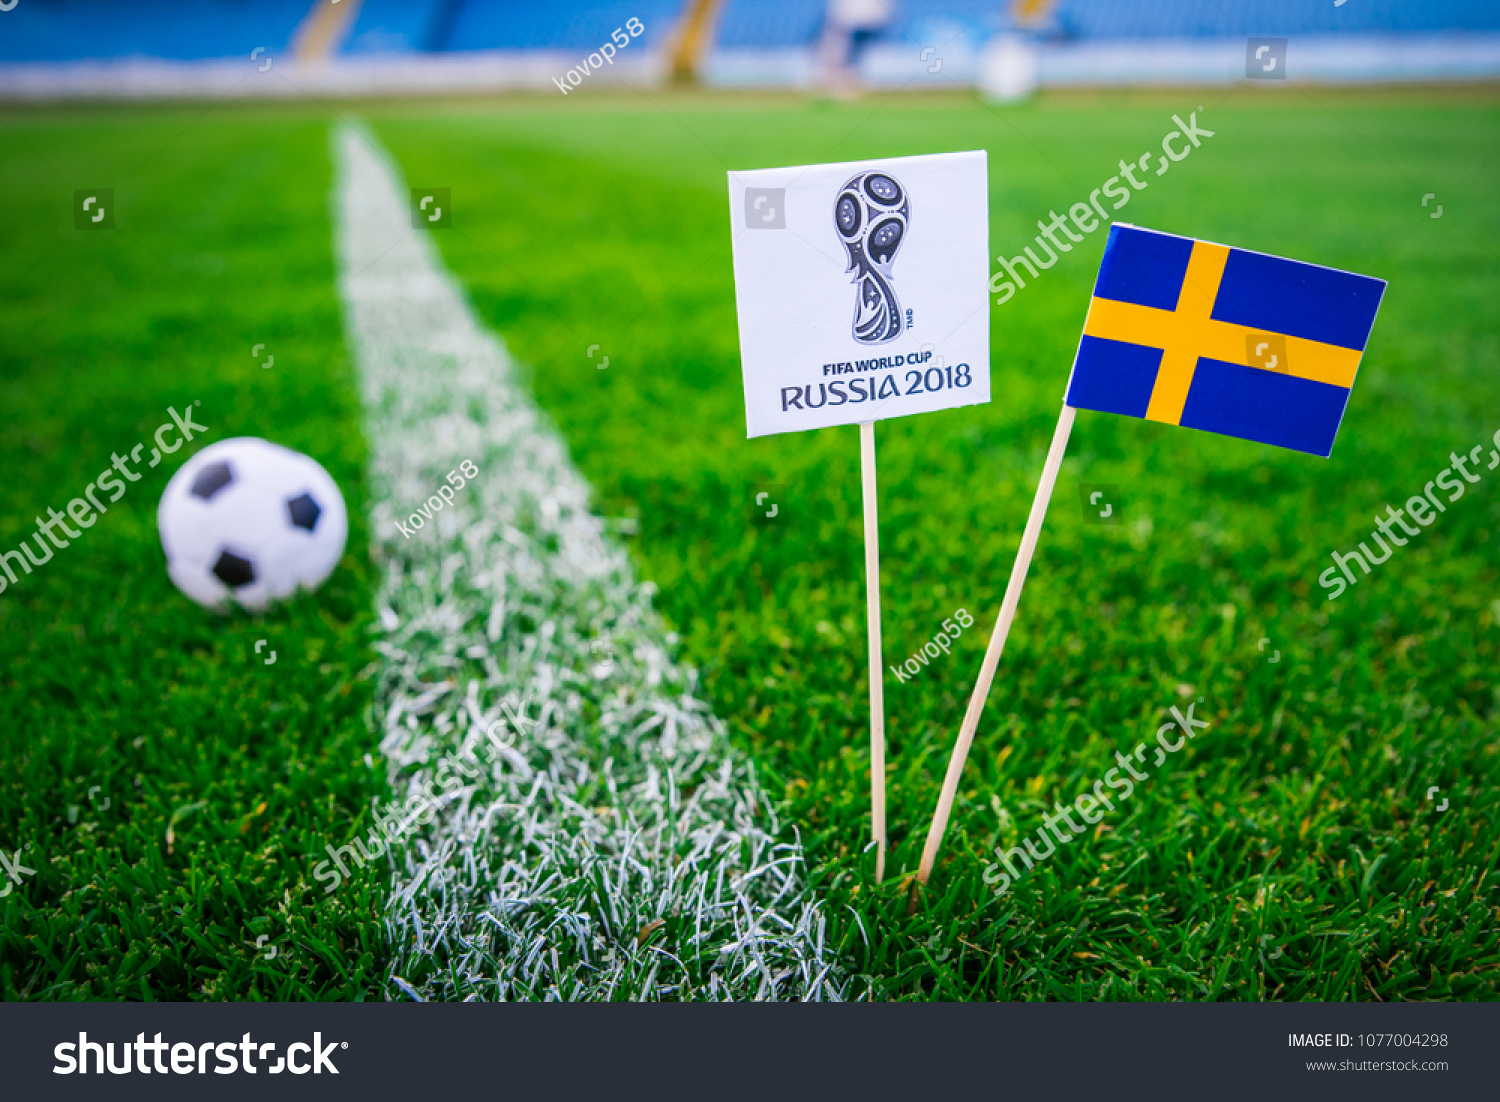 MOSCOW, RUSSIA - APRIL, 24, 2018: Sweden national flag and Official logo of Football FIFA World Cup 2018 in Russia. #1077004298